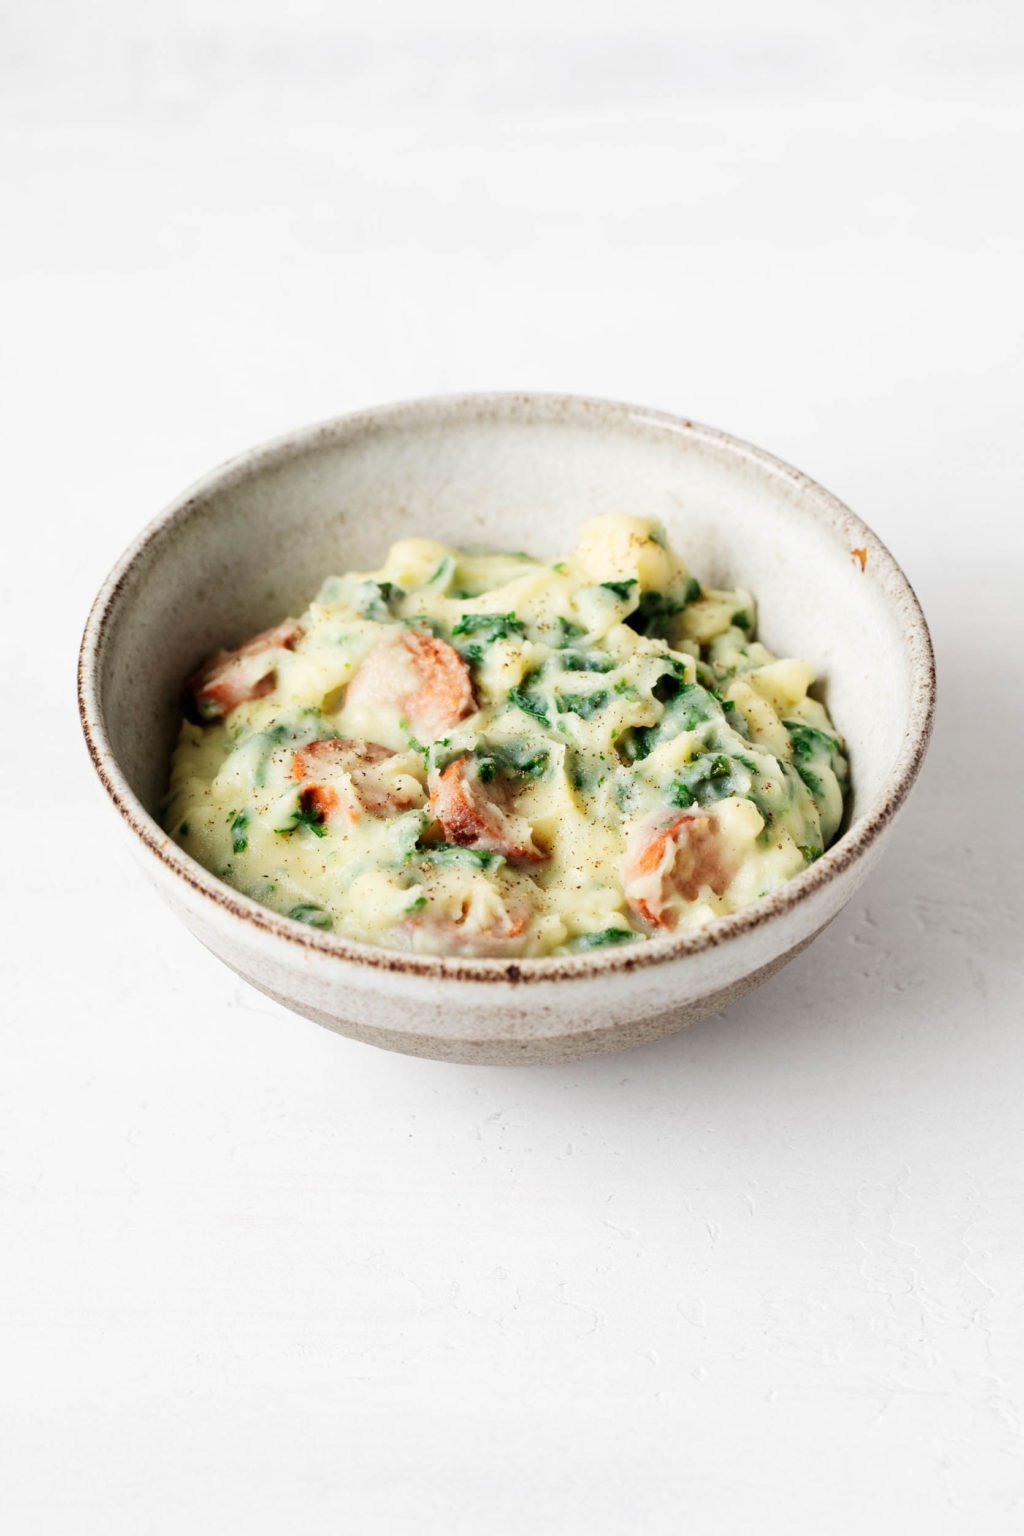 An angled photograph of a ceramic bowl holding a vegan kale colcannon recipe. It rests on a white surface.